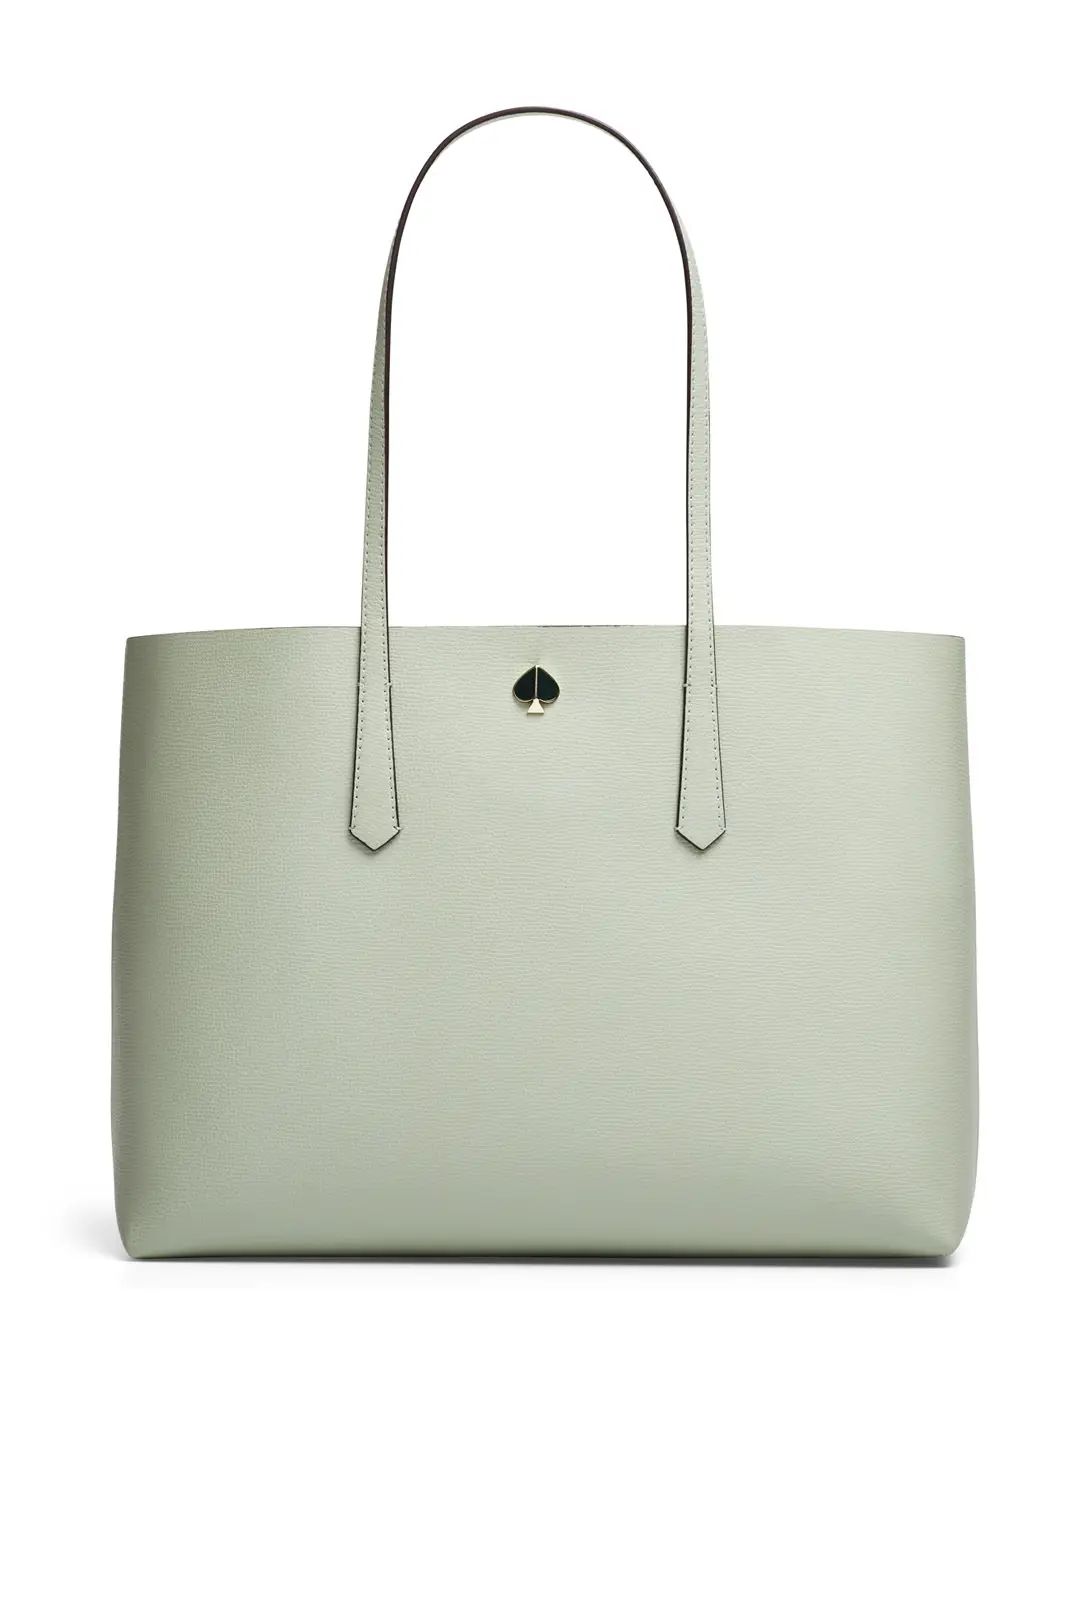 kate spade new york accessories Pistachio Molly Large Tote | Rent The Runway